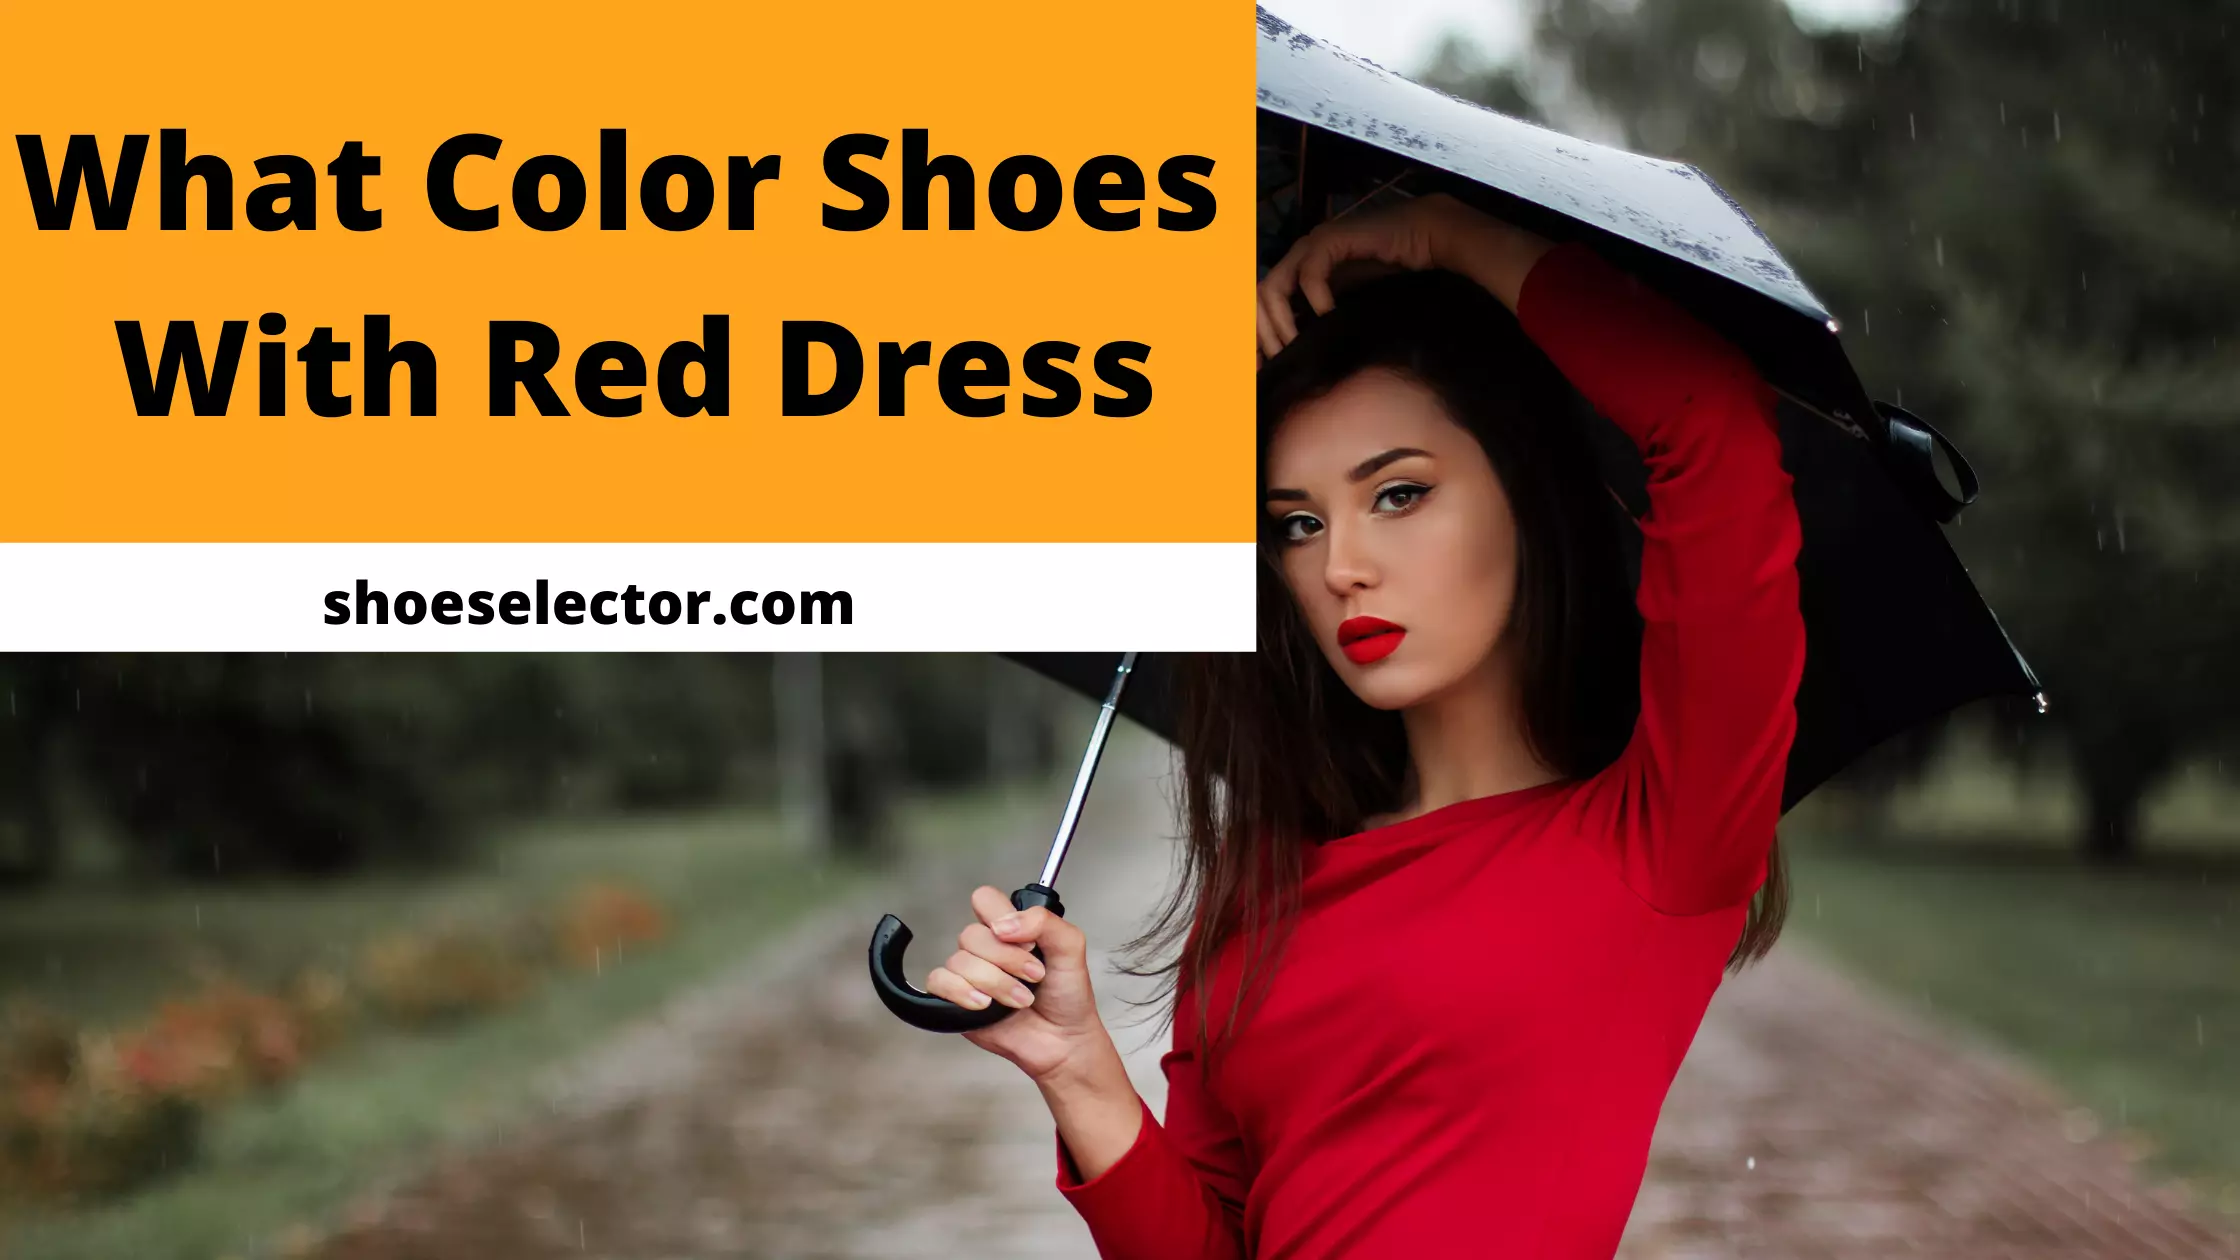 What Color Shoes to Wear With a Red Dress? - #1 Solution